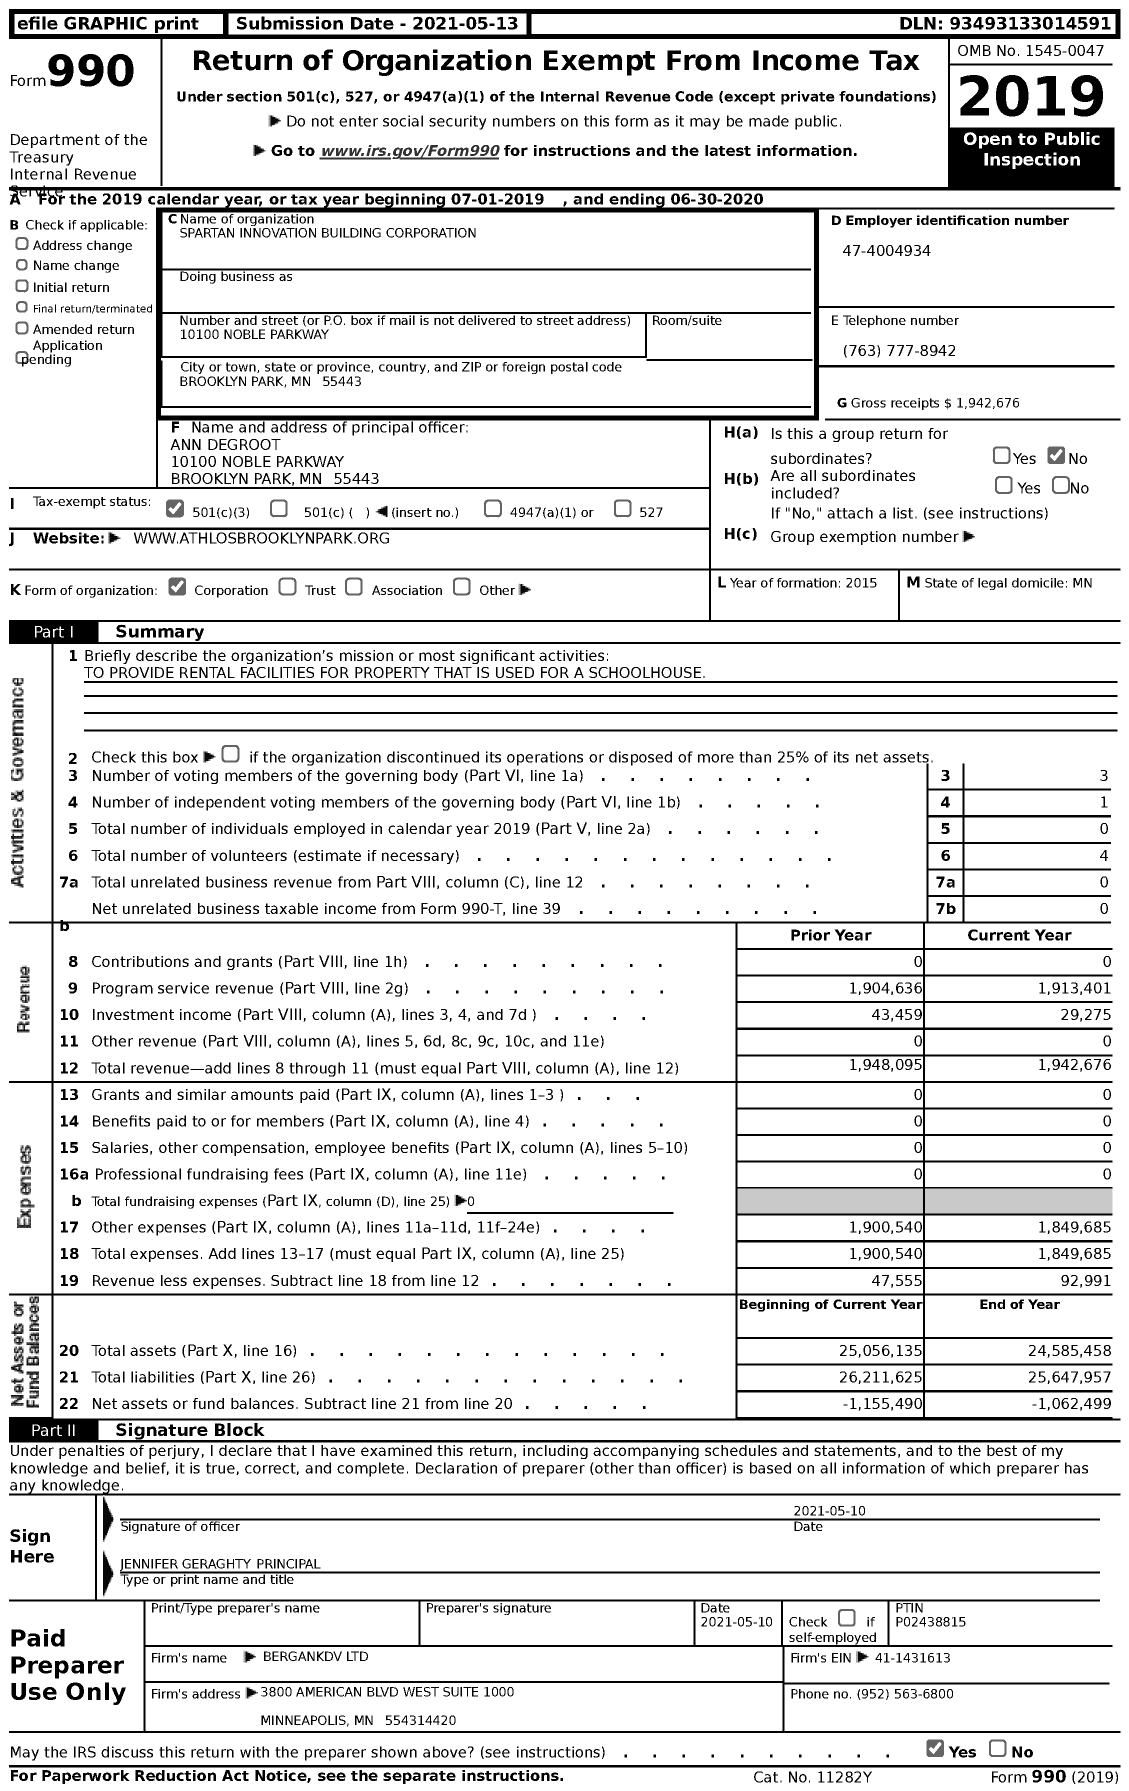 Image of first page of 2019 Form 990 for Spartan Innovation Building Corporation